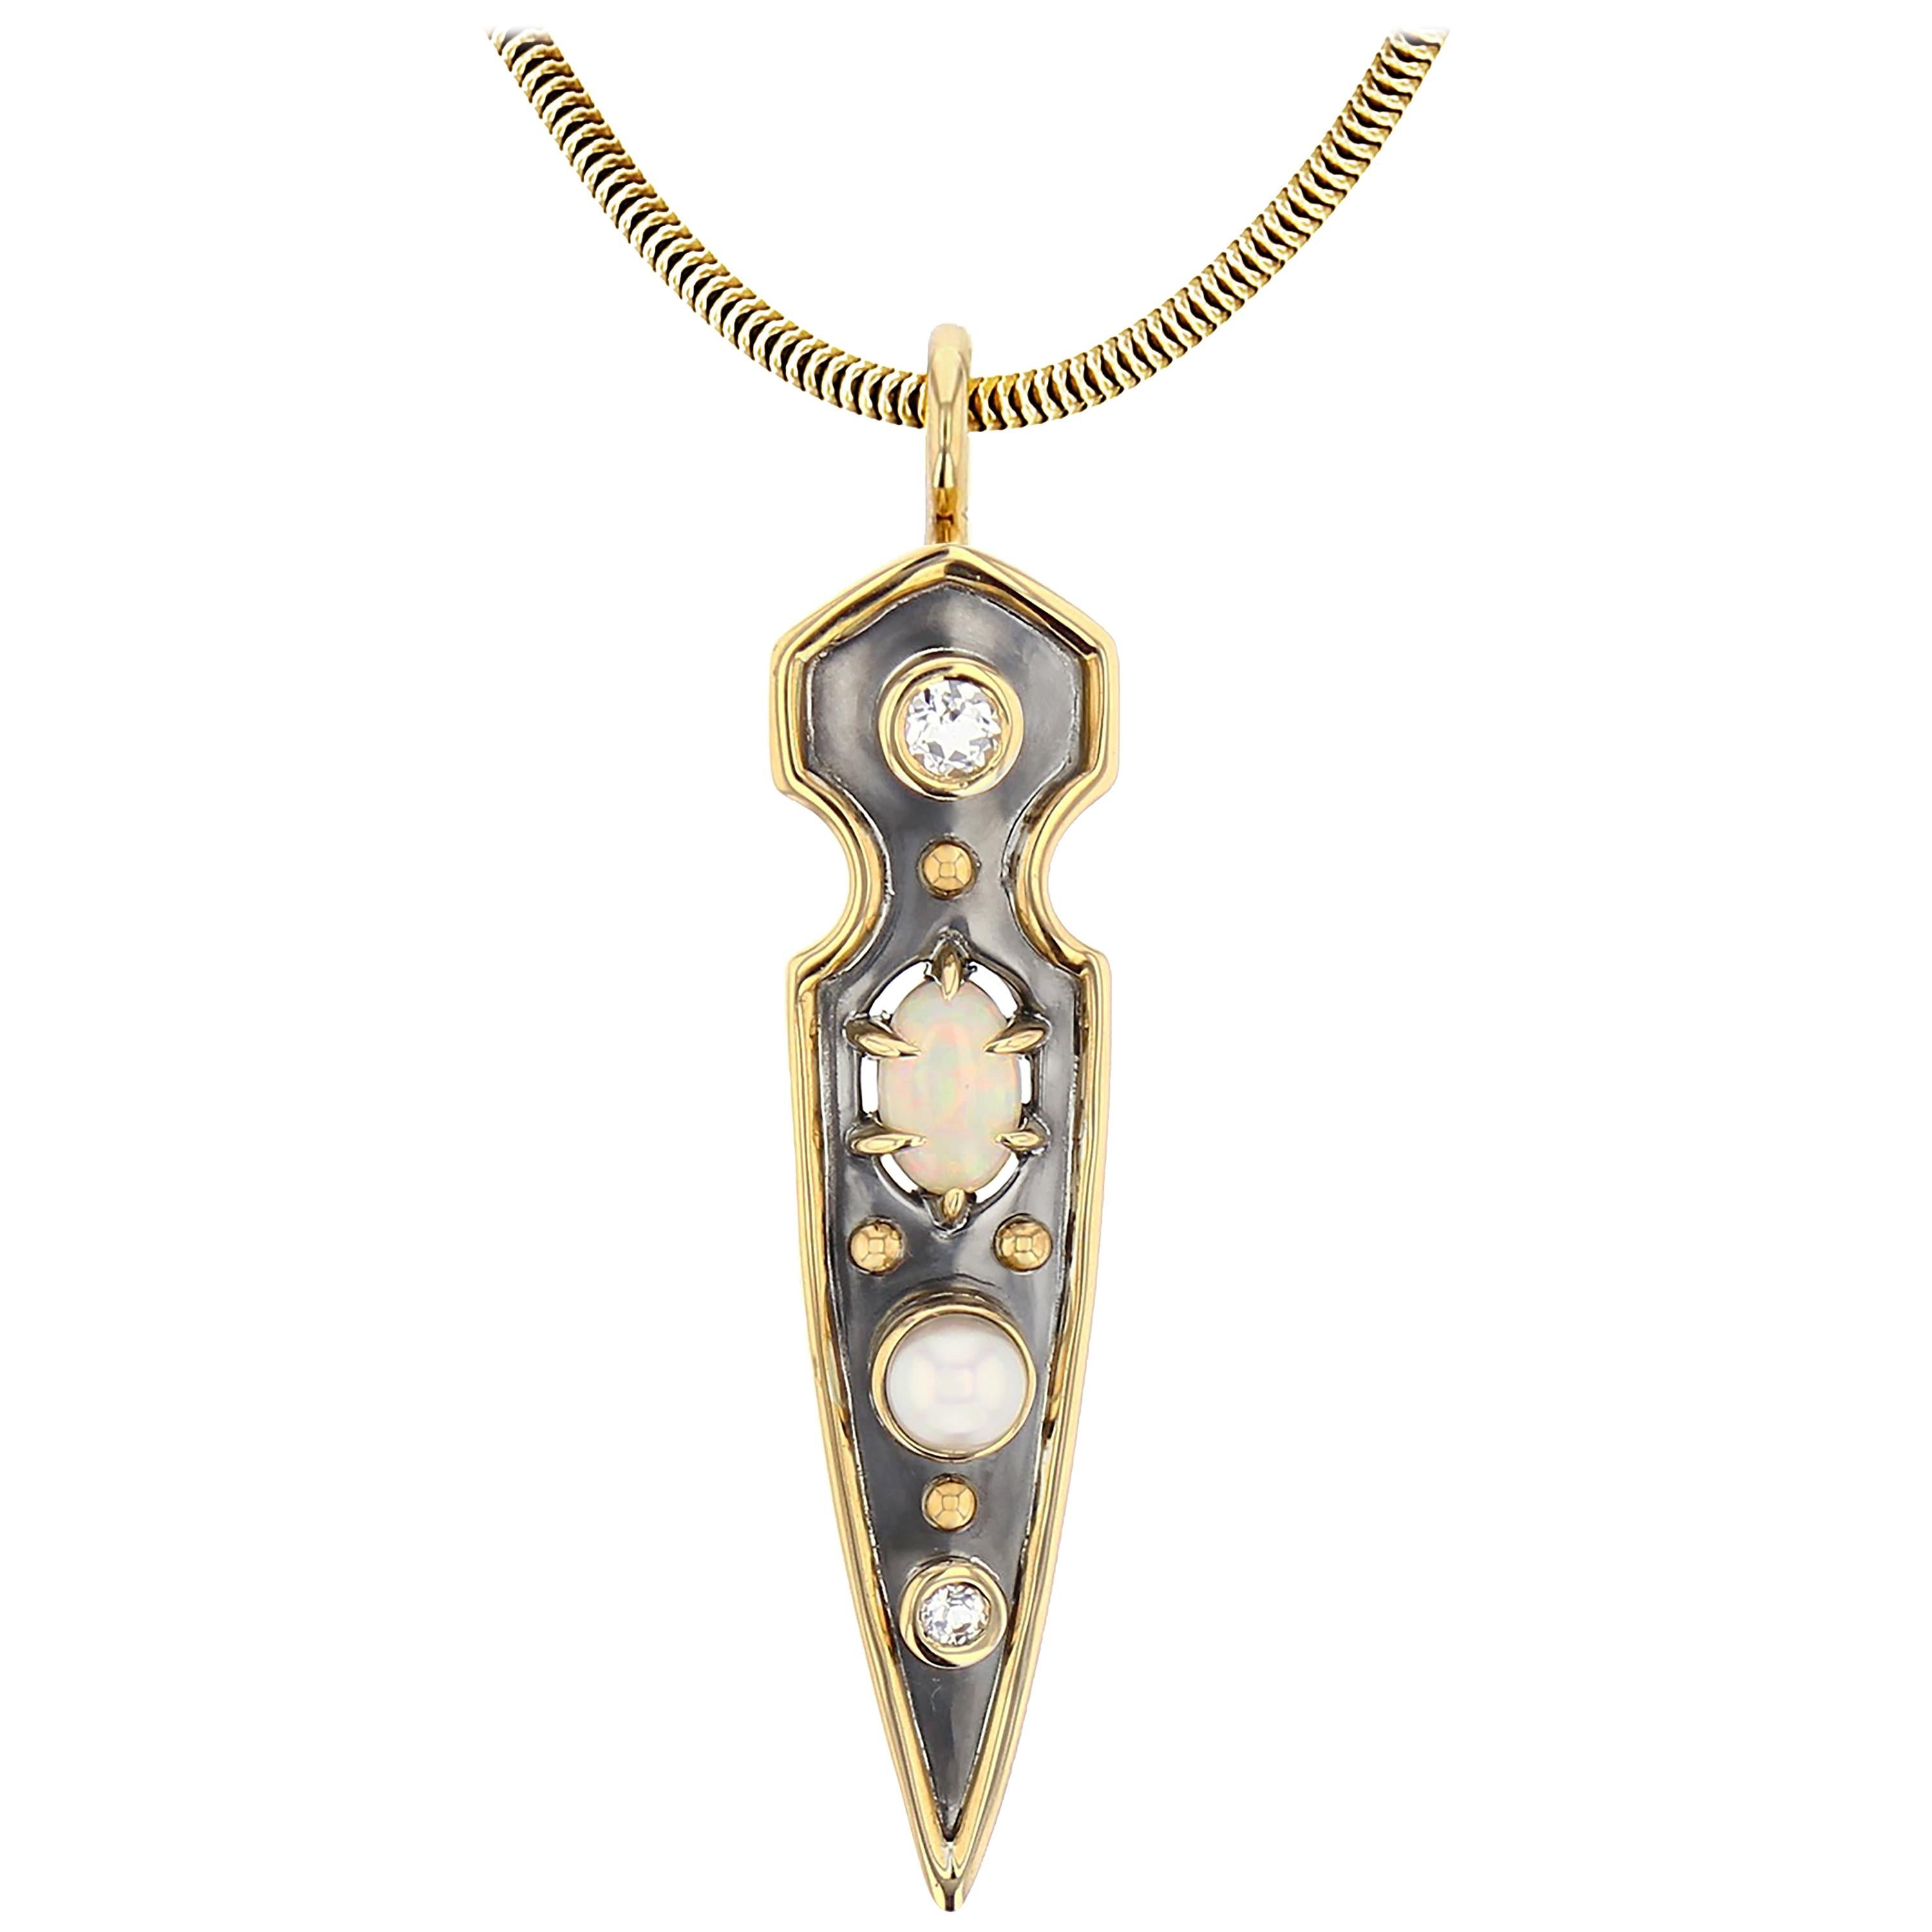 Opal Topaz Akoya Pearls Stylet Pendant Necklace in 18k Yellow Gold by Elie Top